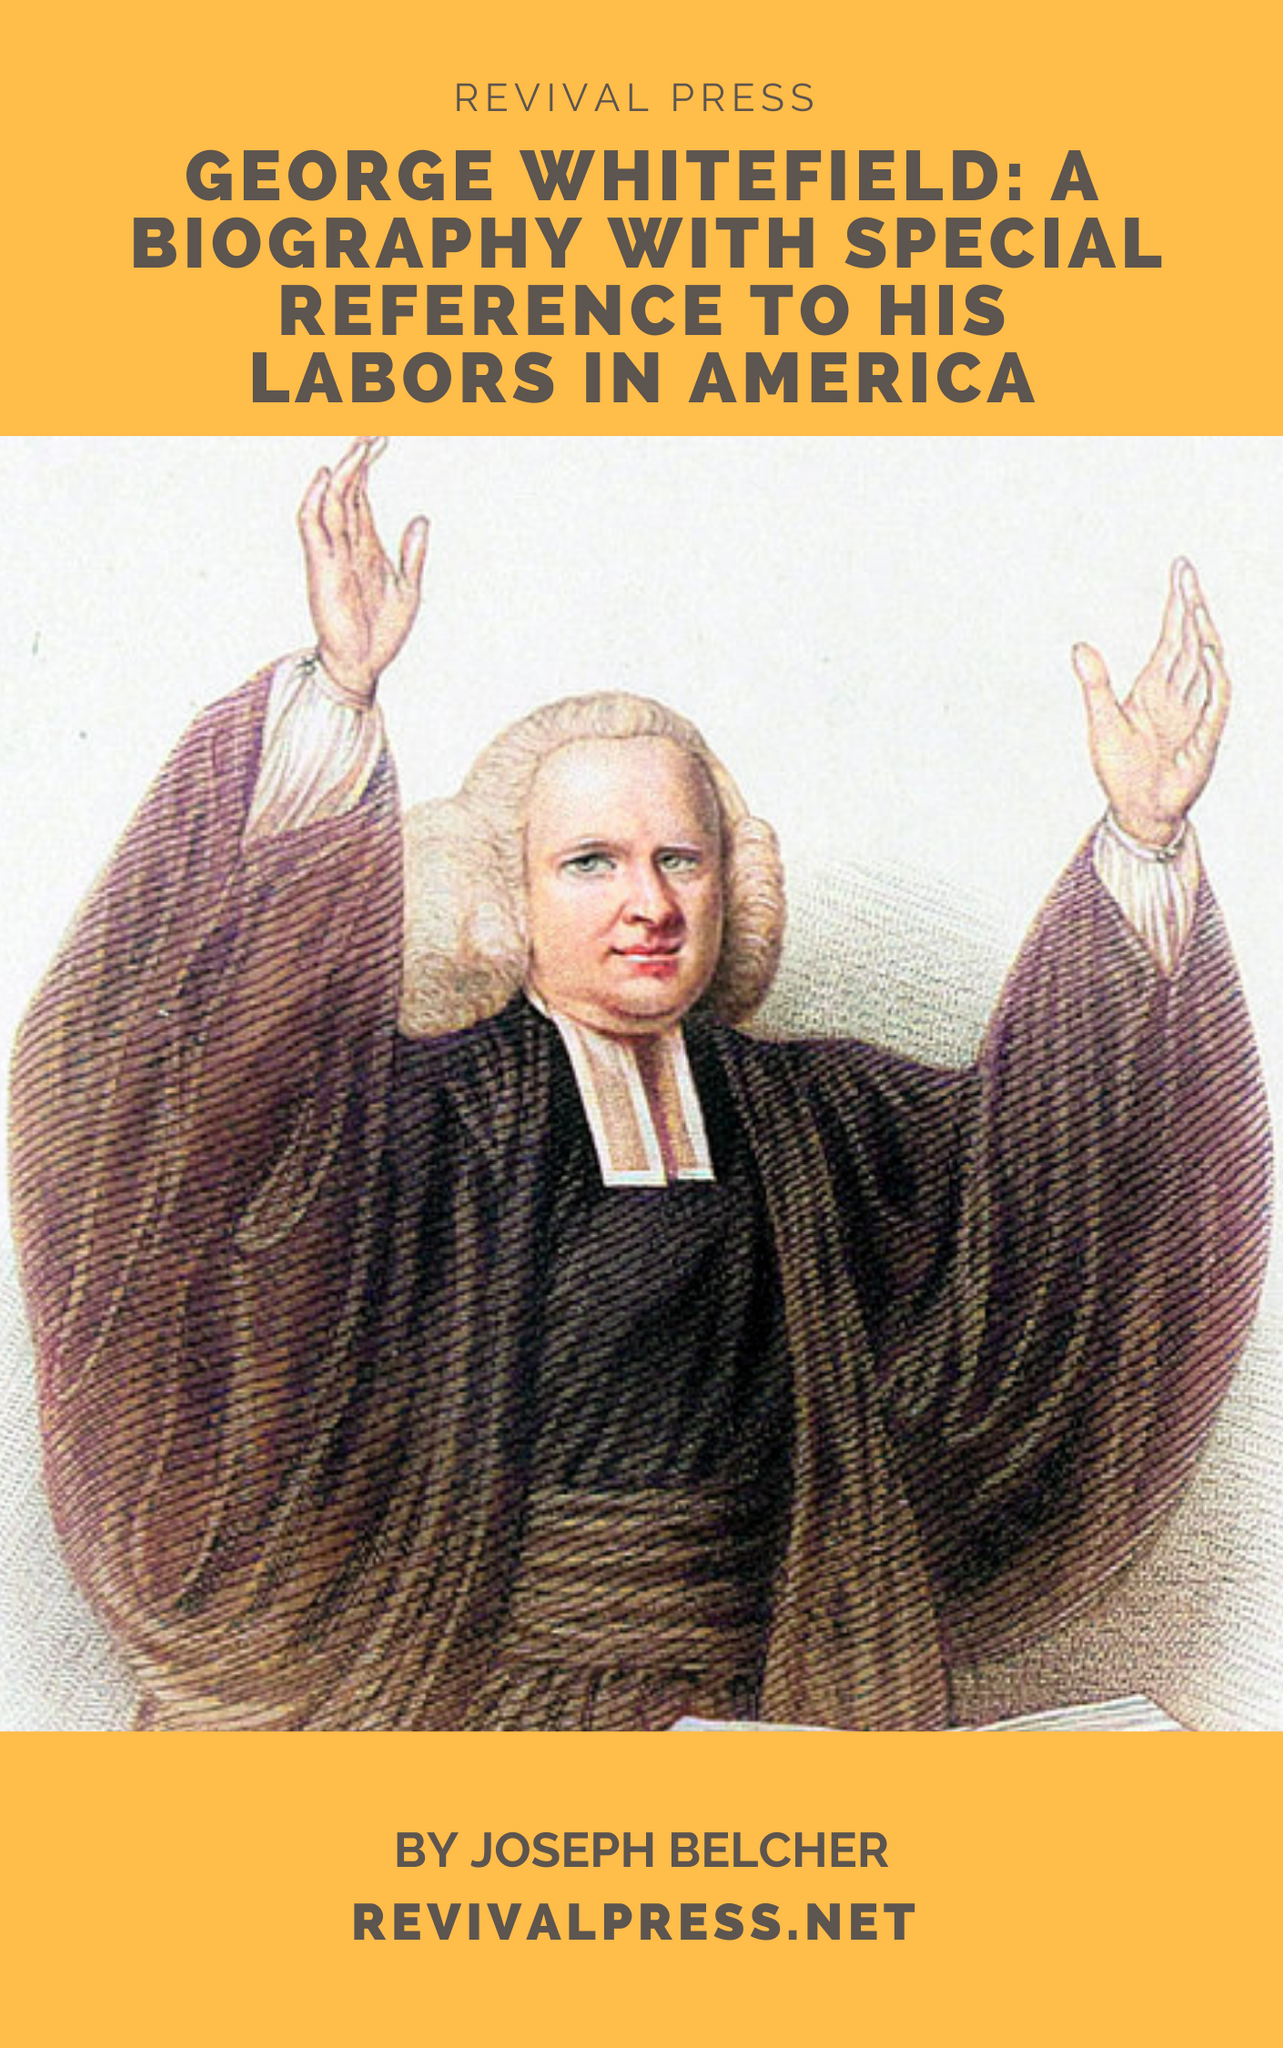 GEORGE WHITEFIELD: A BIOGRAPHY WITH SPECIAL REFERENCE TO HIS LABORS IN AMERICA BY JOSEPH BELCHER (E-BOOK)